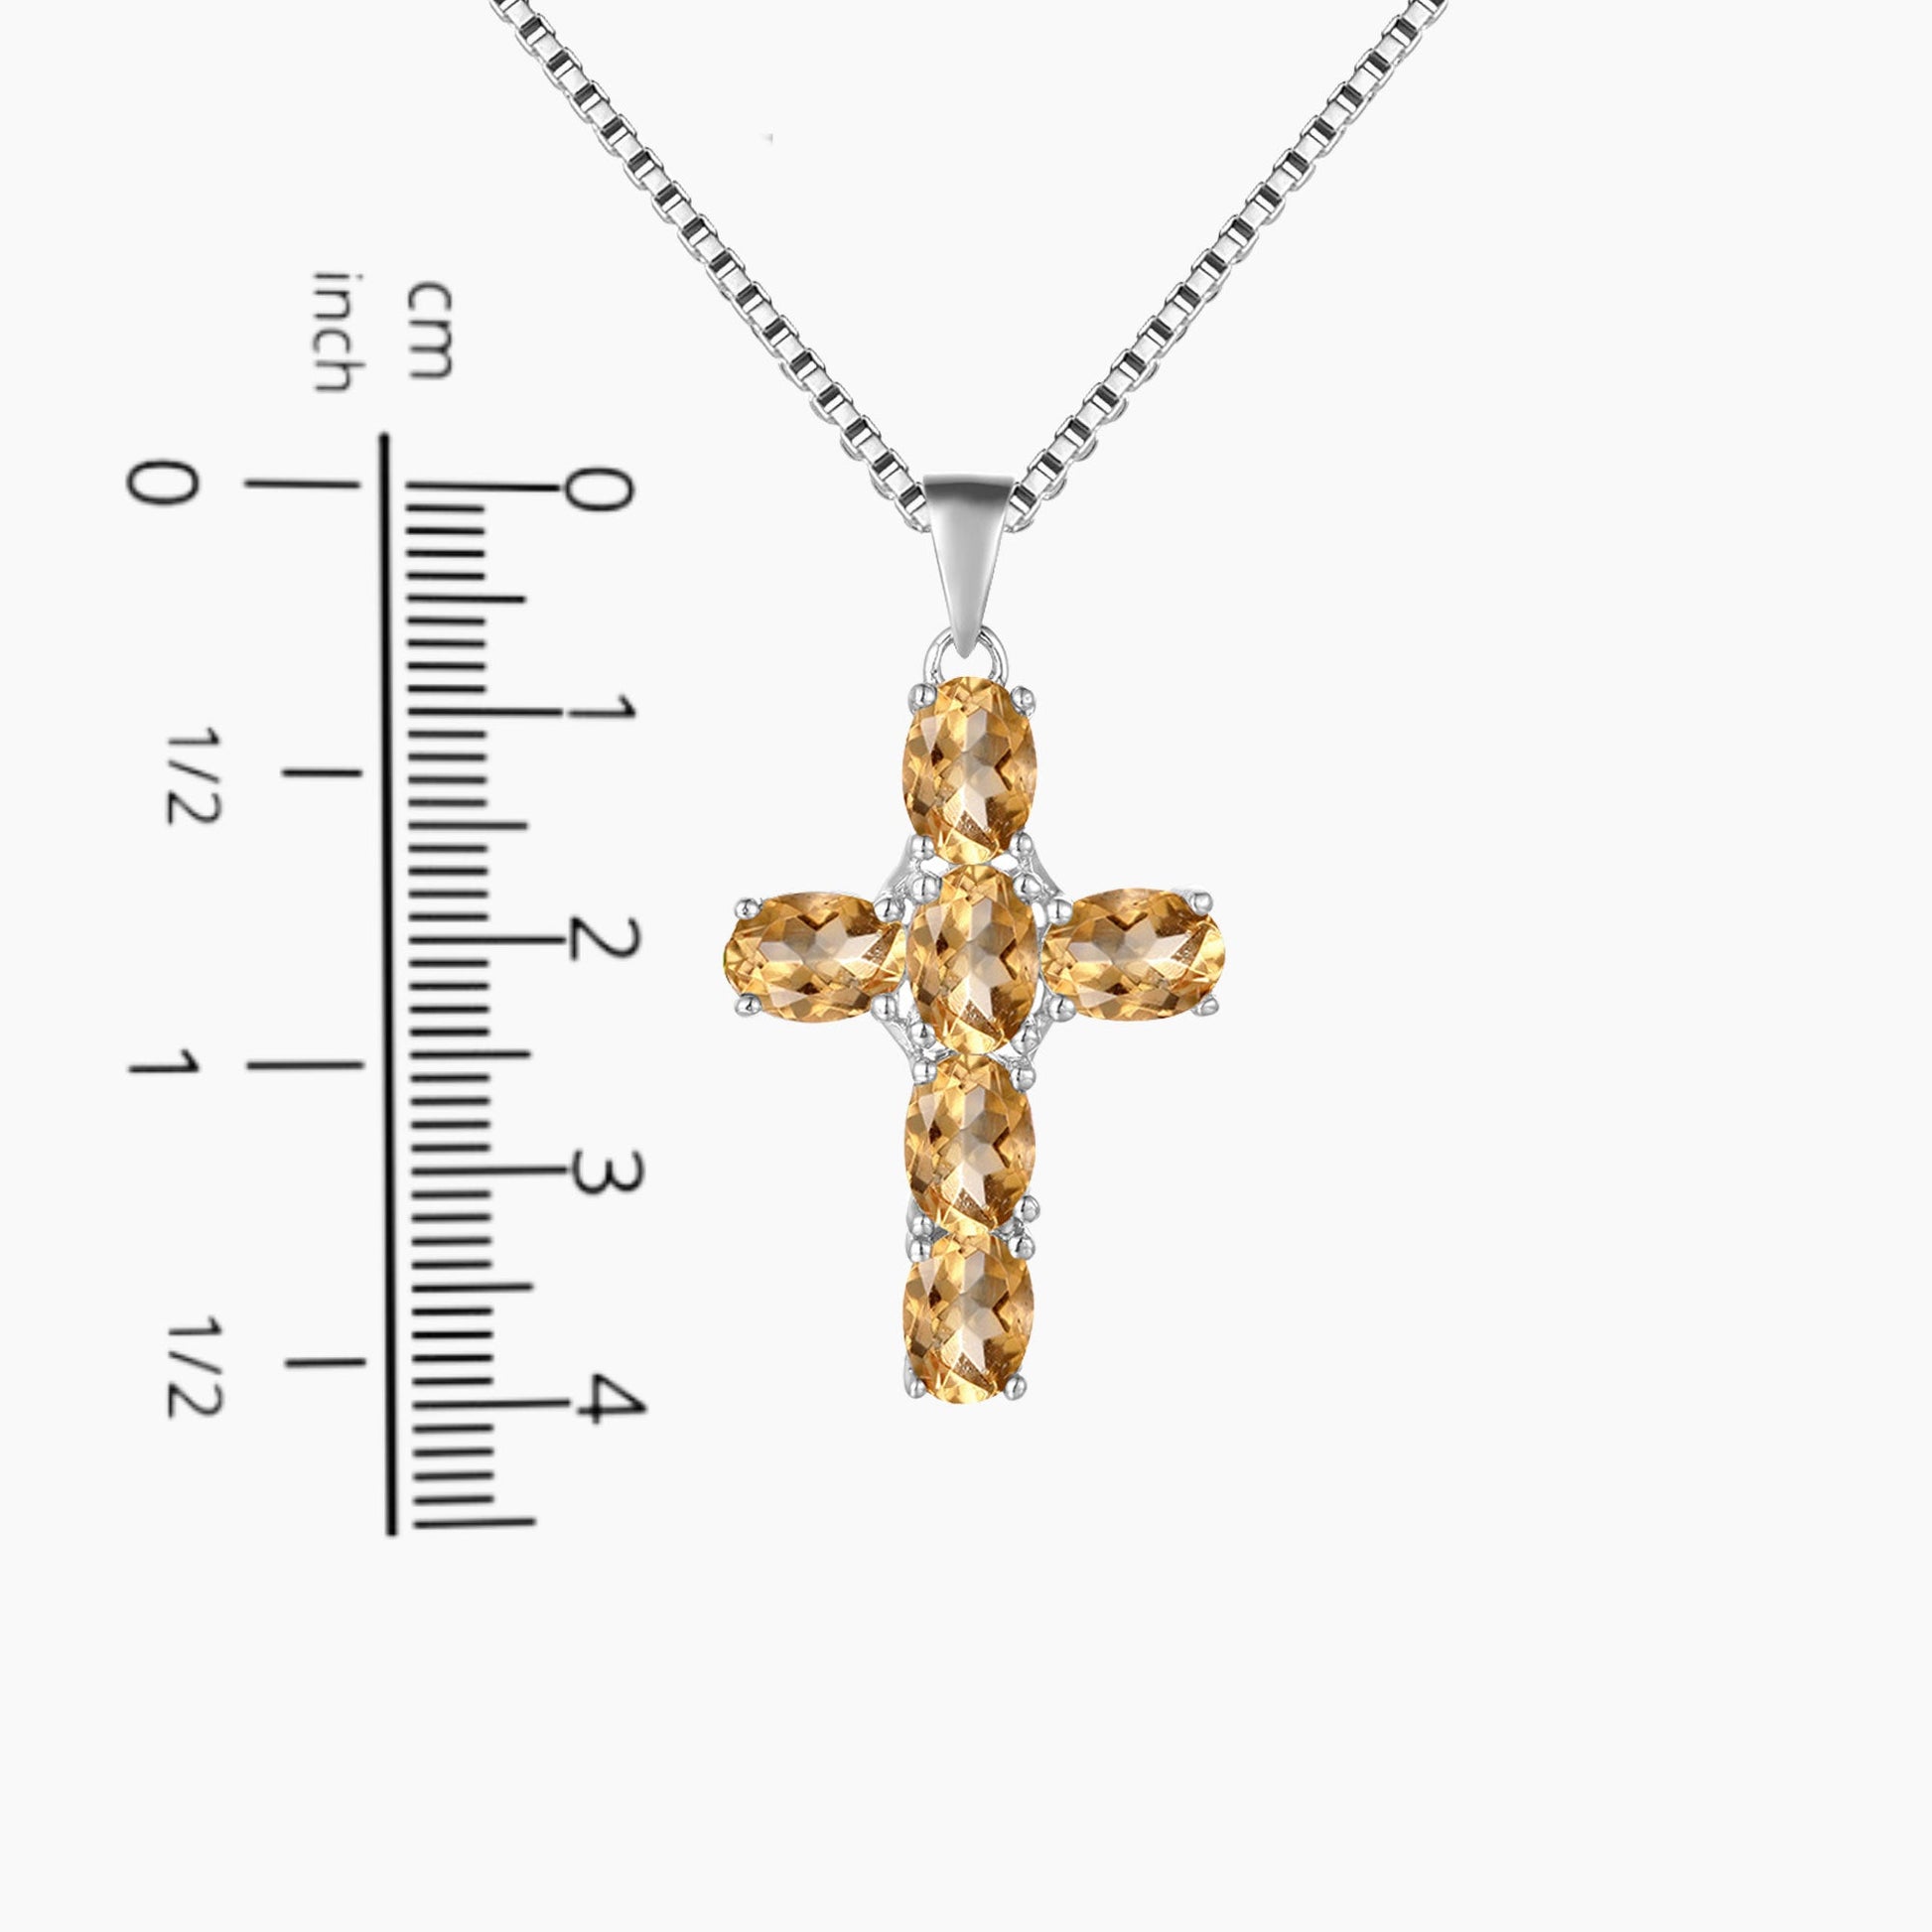 Cross Necklace with Citrine Gemstone - Scale Image